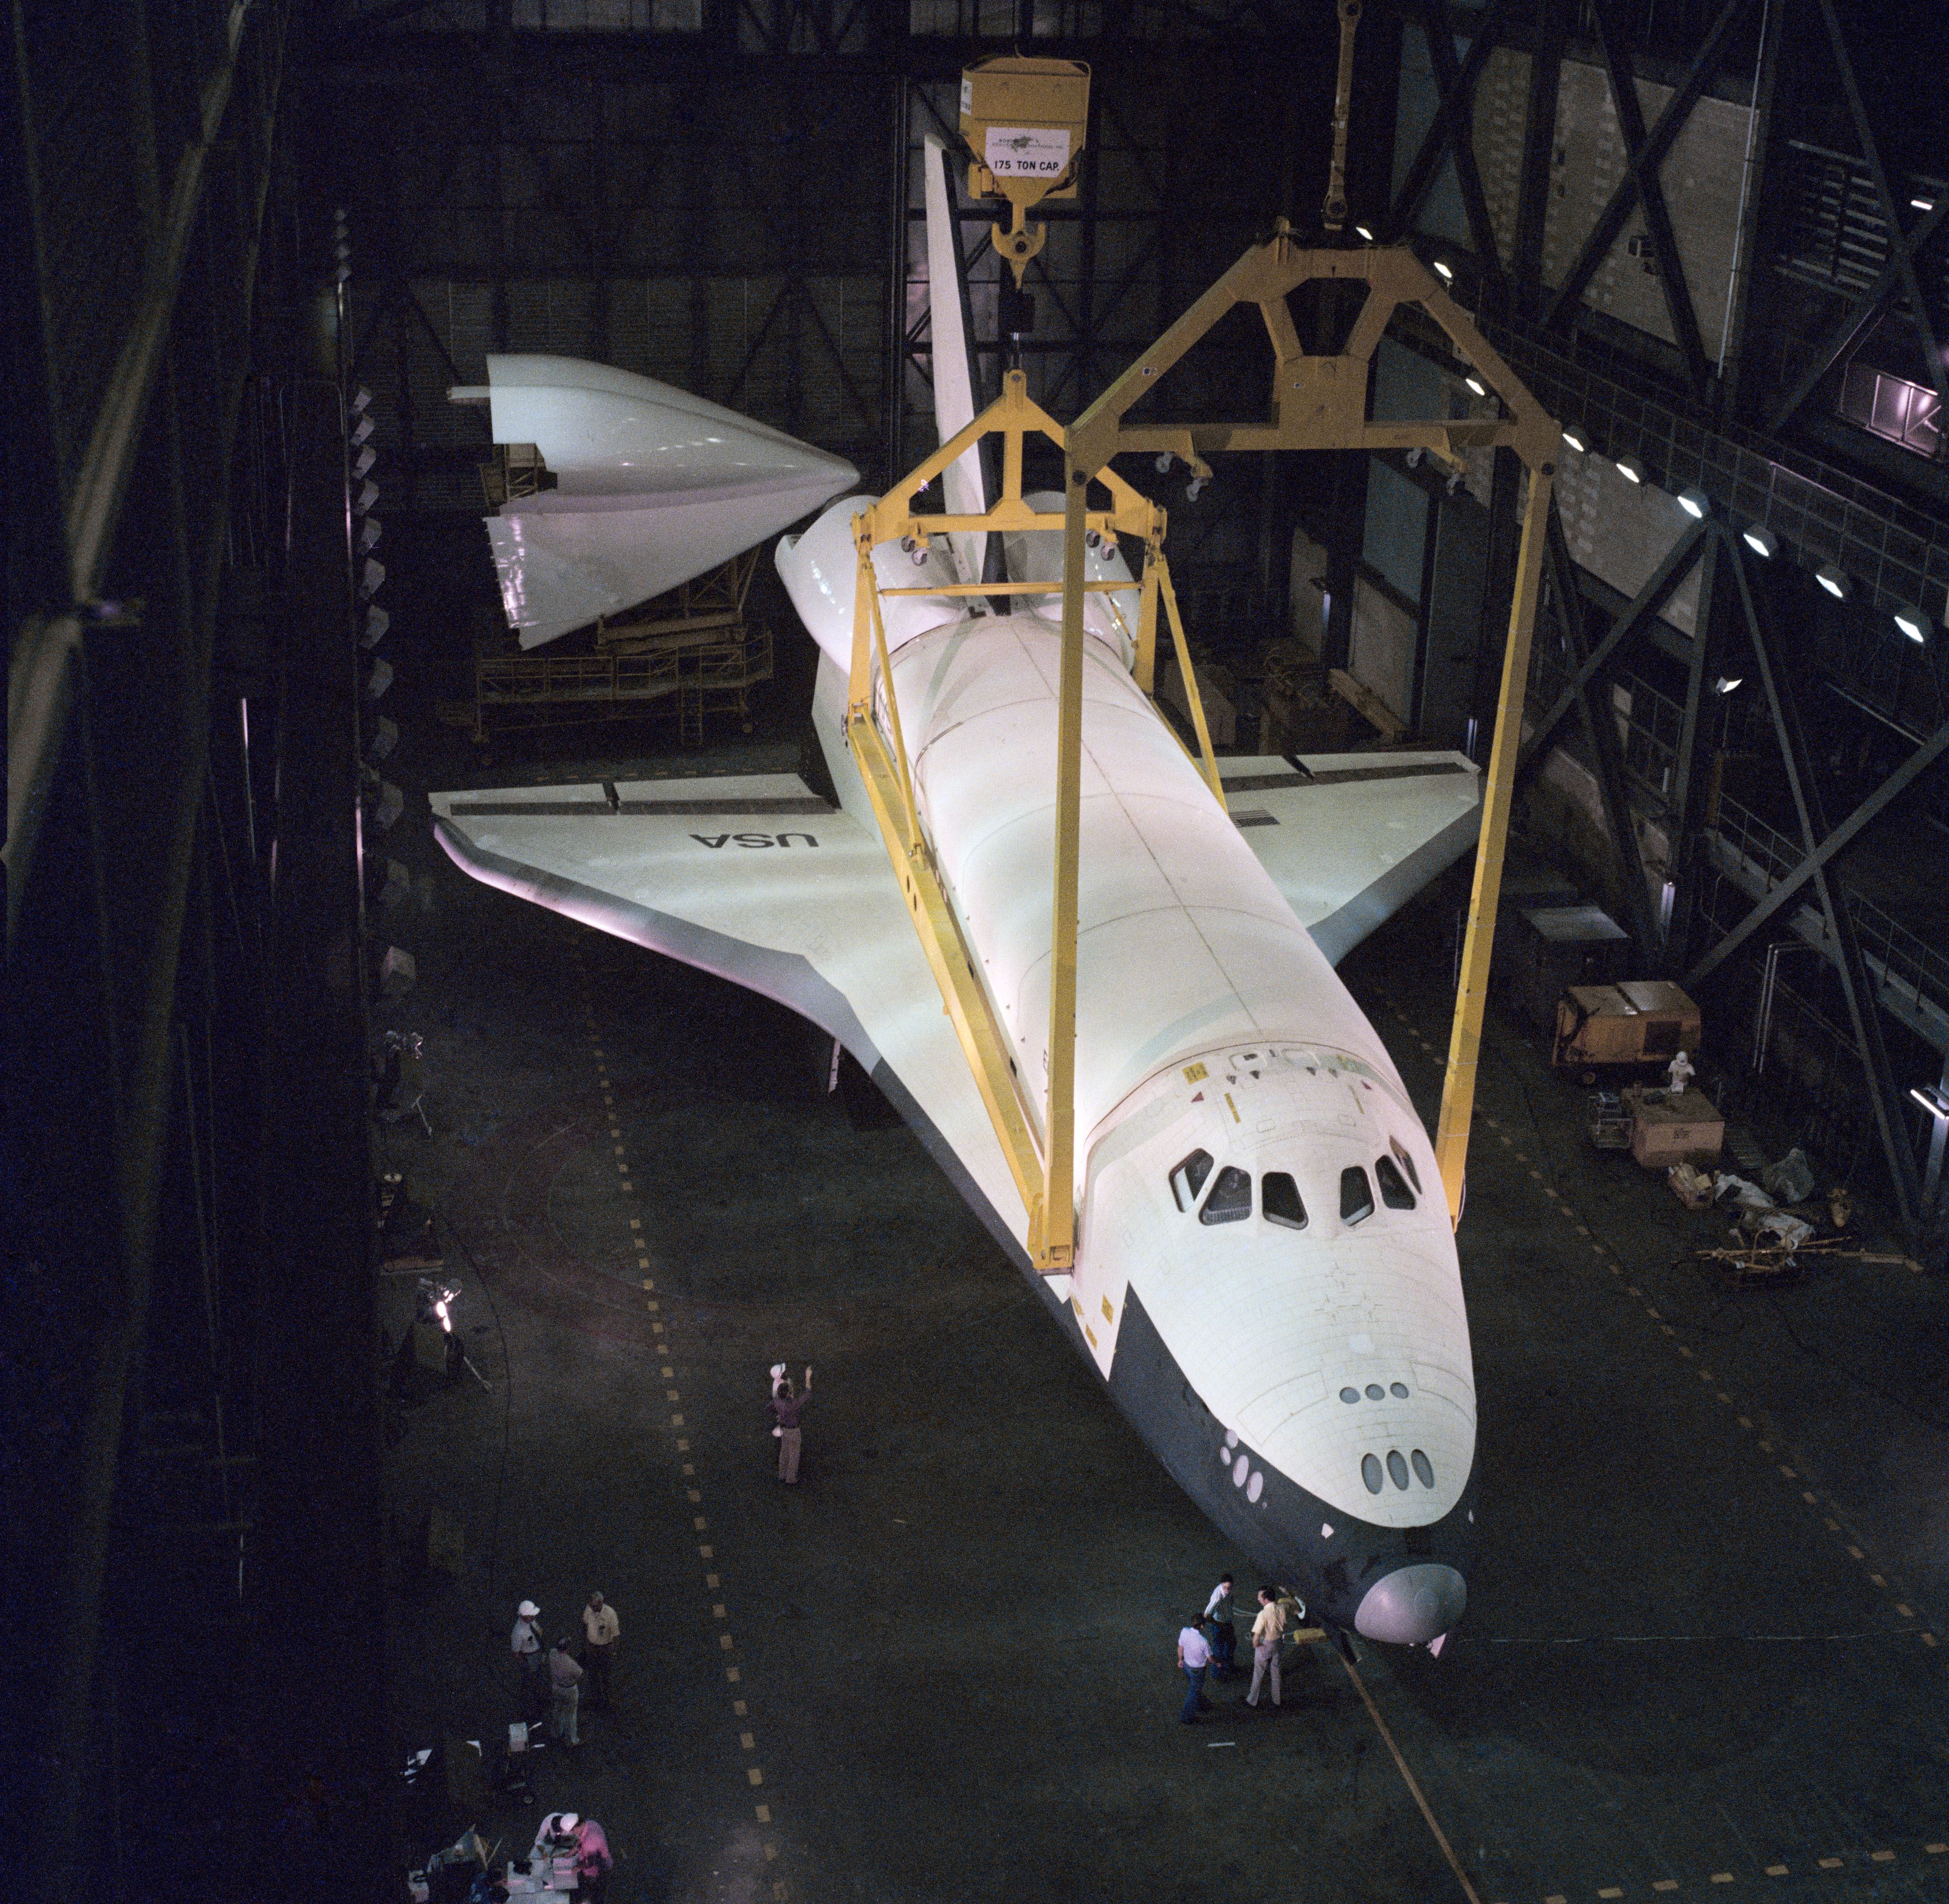 At NASA’s Kennedy Space Center in Florida, workers in the Vehicle Assembly Building prepare to lift Enterprise